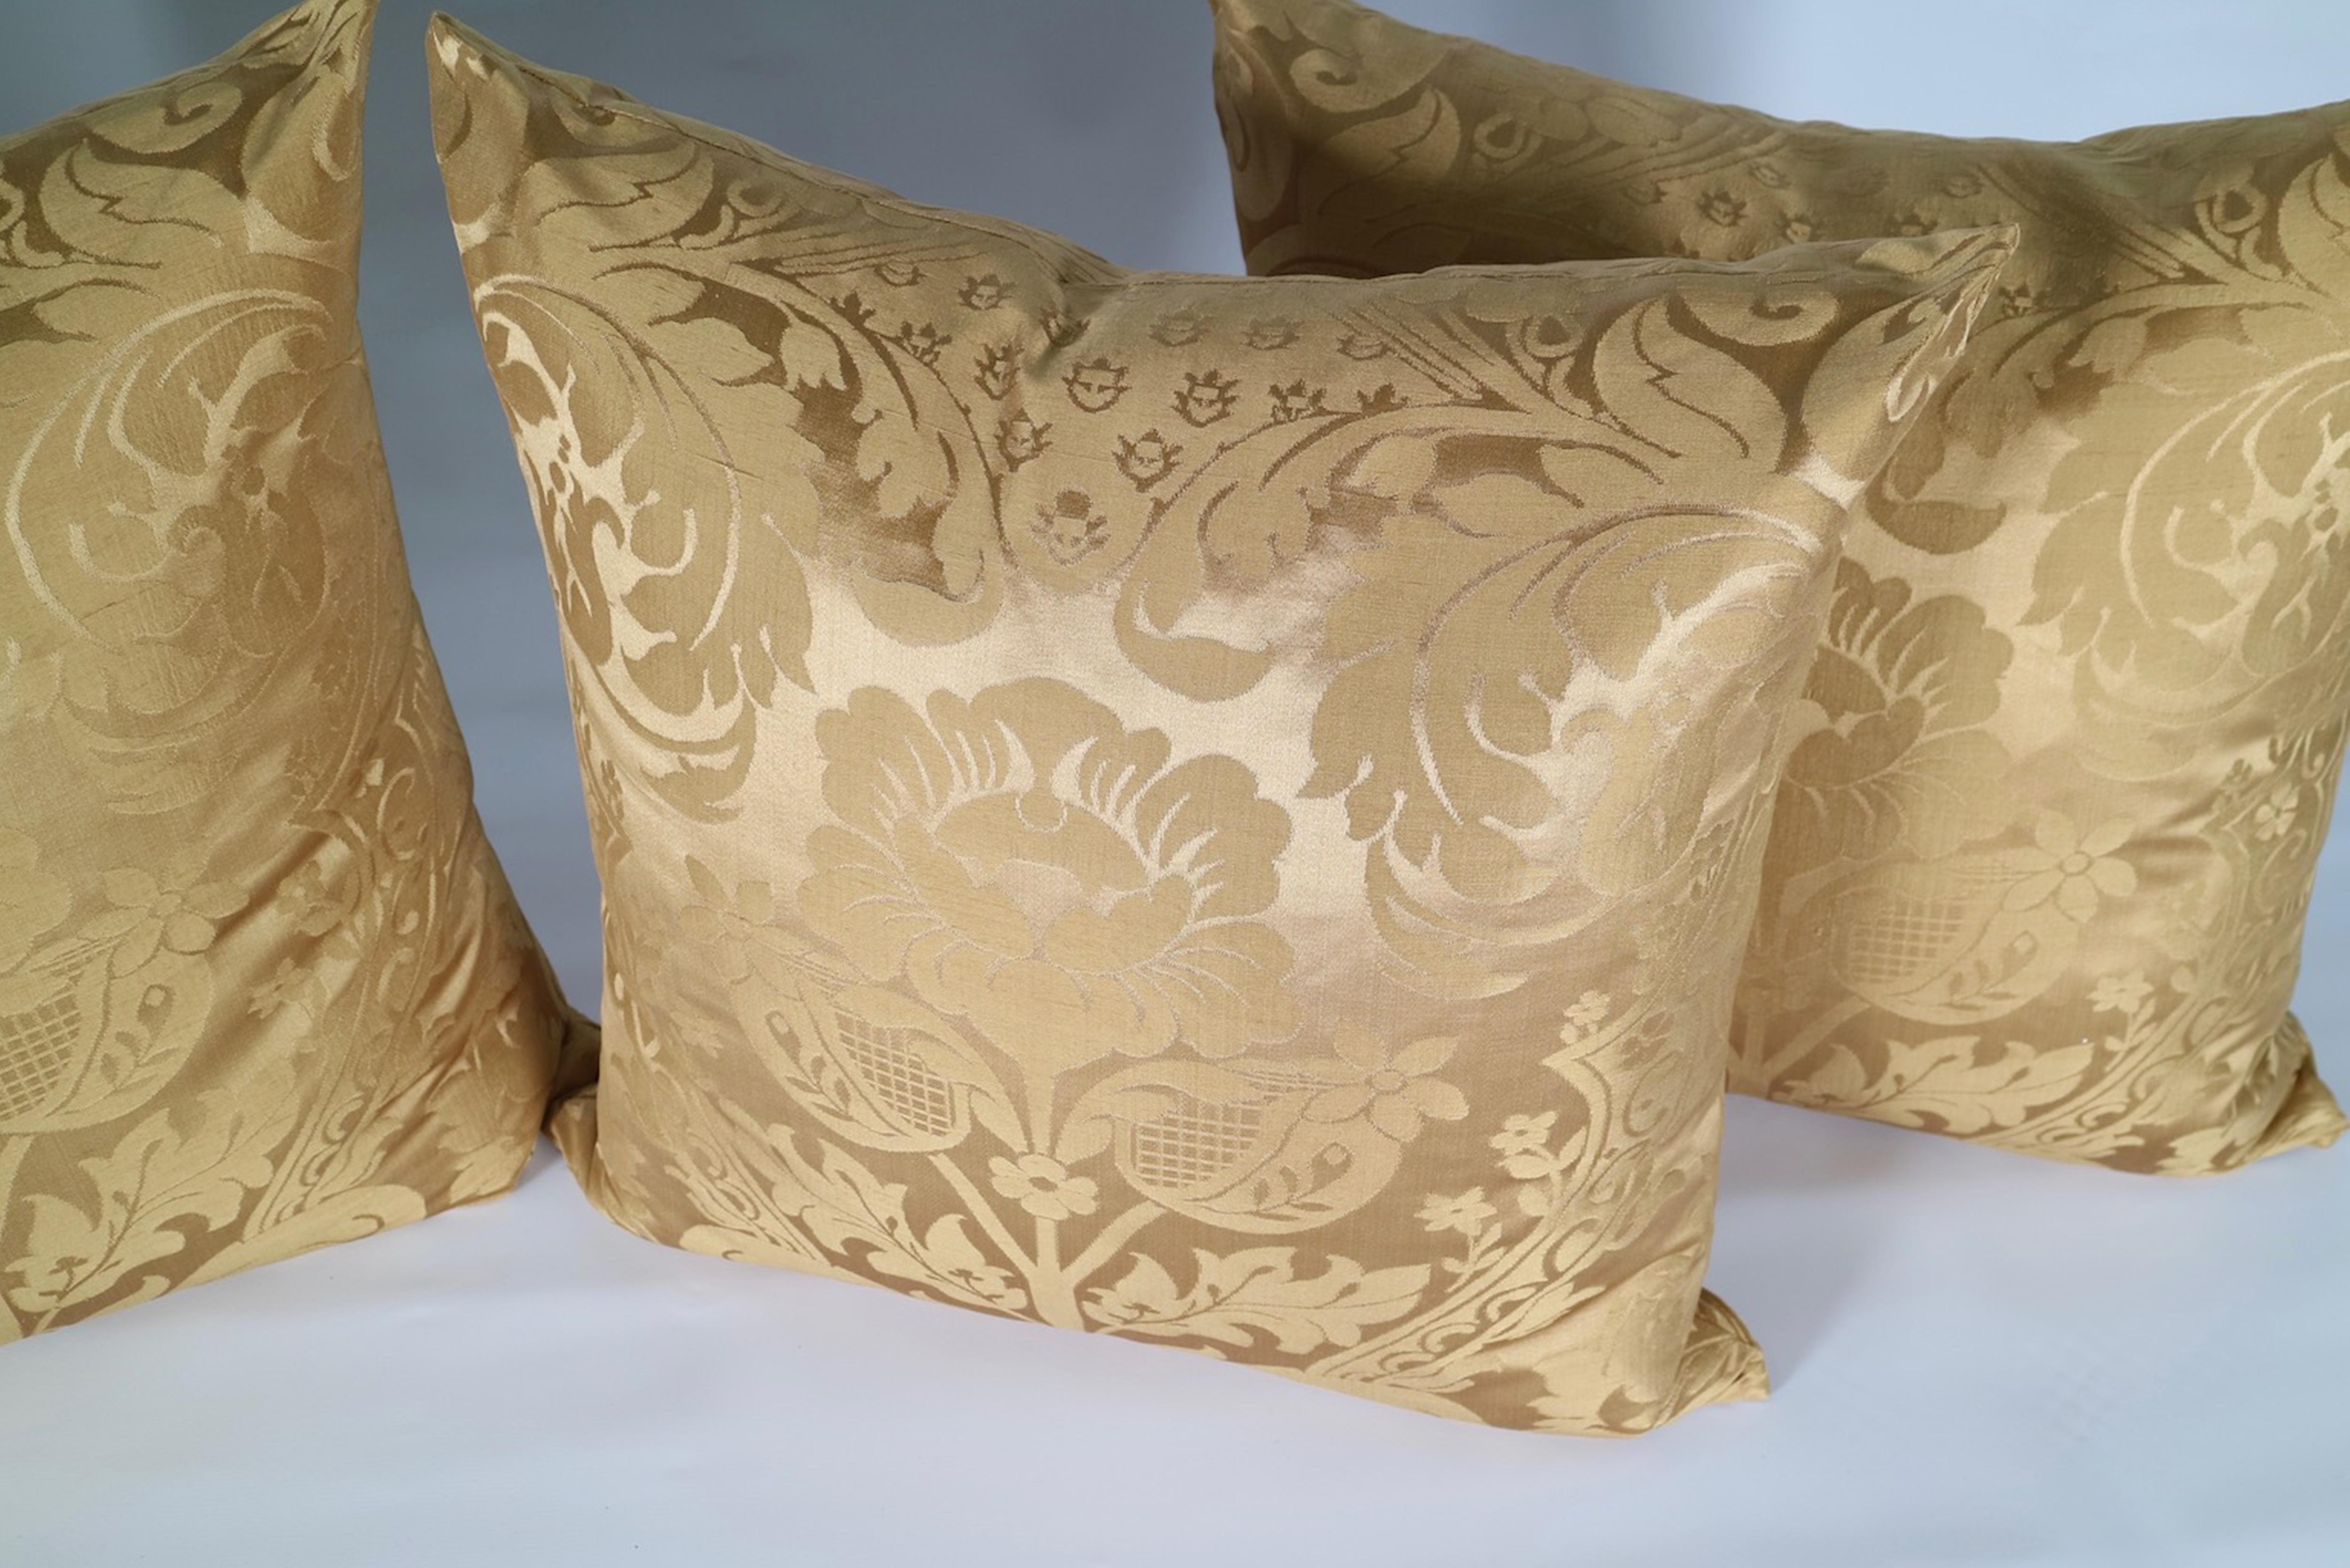 Antique square pillows in gold silk damask. The set includes new down and feather inserts. There are a total of four pillows with another set of four available. The pillows remain in excellent condition.